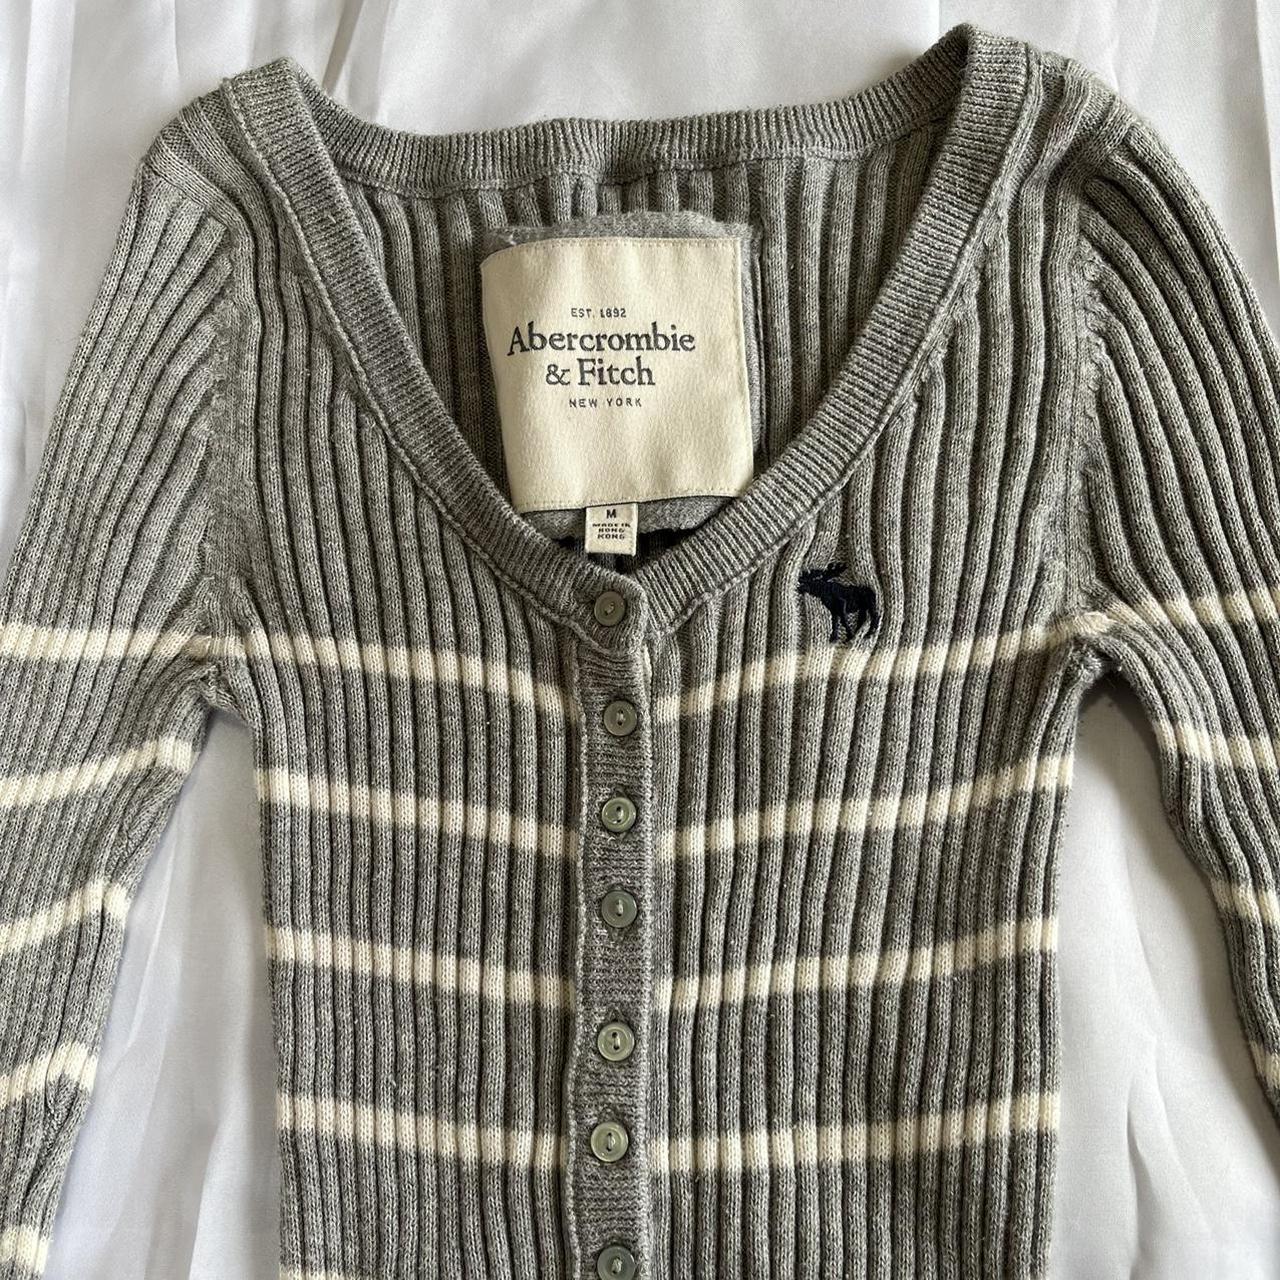 Abercrombie & Fitch Women's Grey and White Jumper | Depop